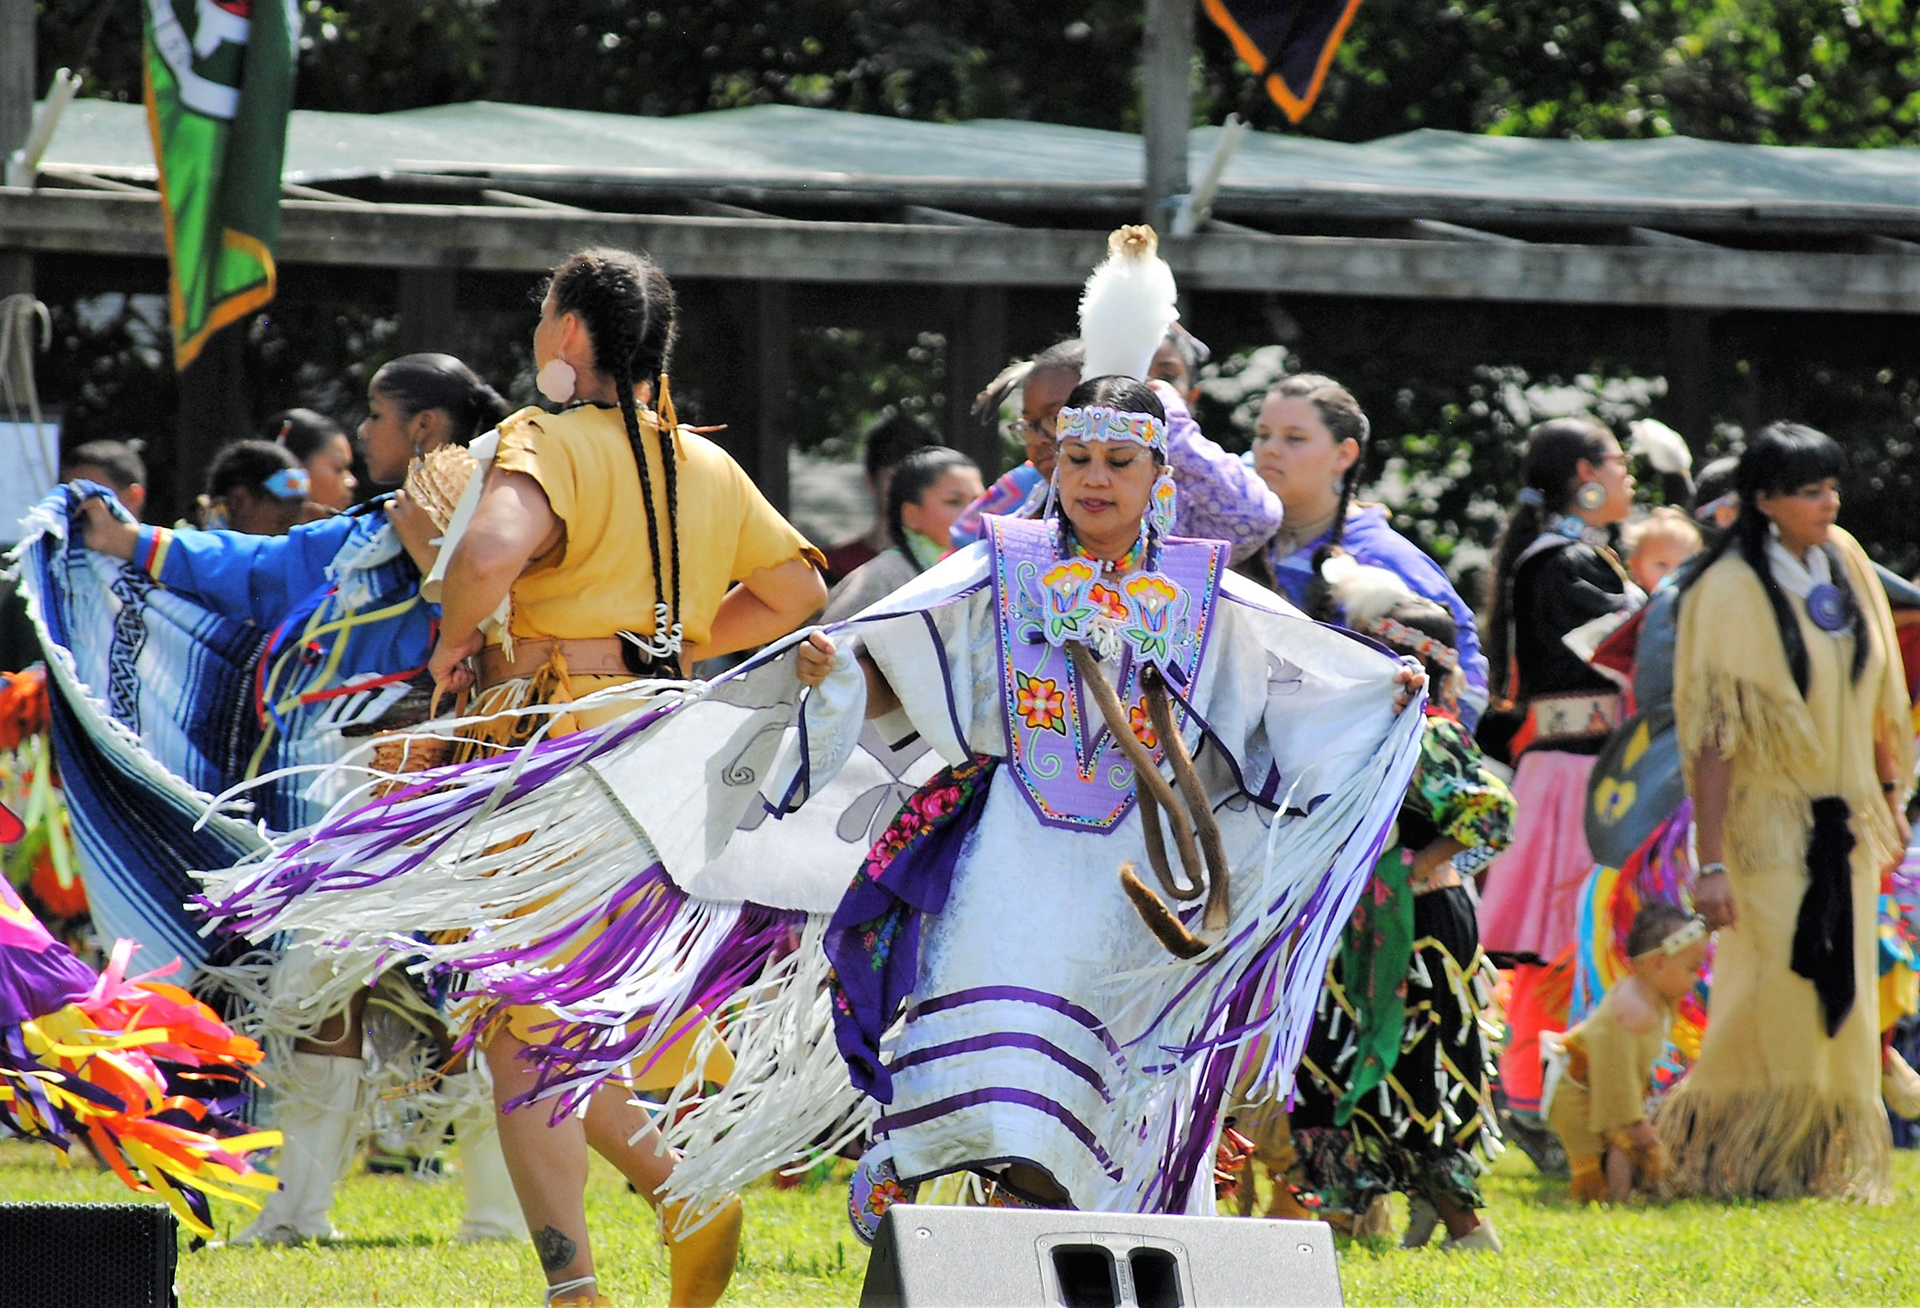 The public flocks to the Shinnecock Indian Powwow each year to see traditional Native American dances.